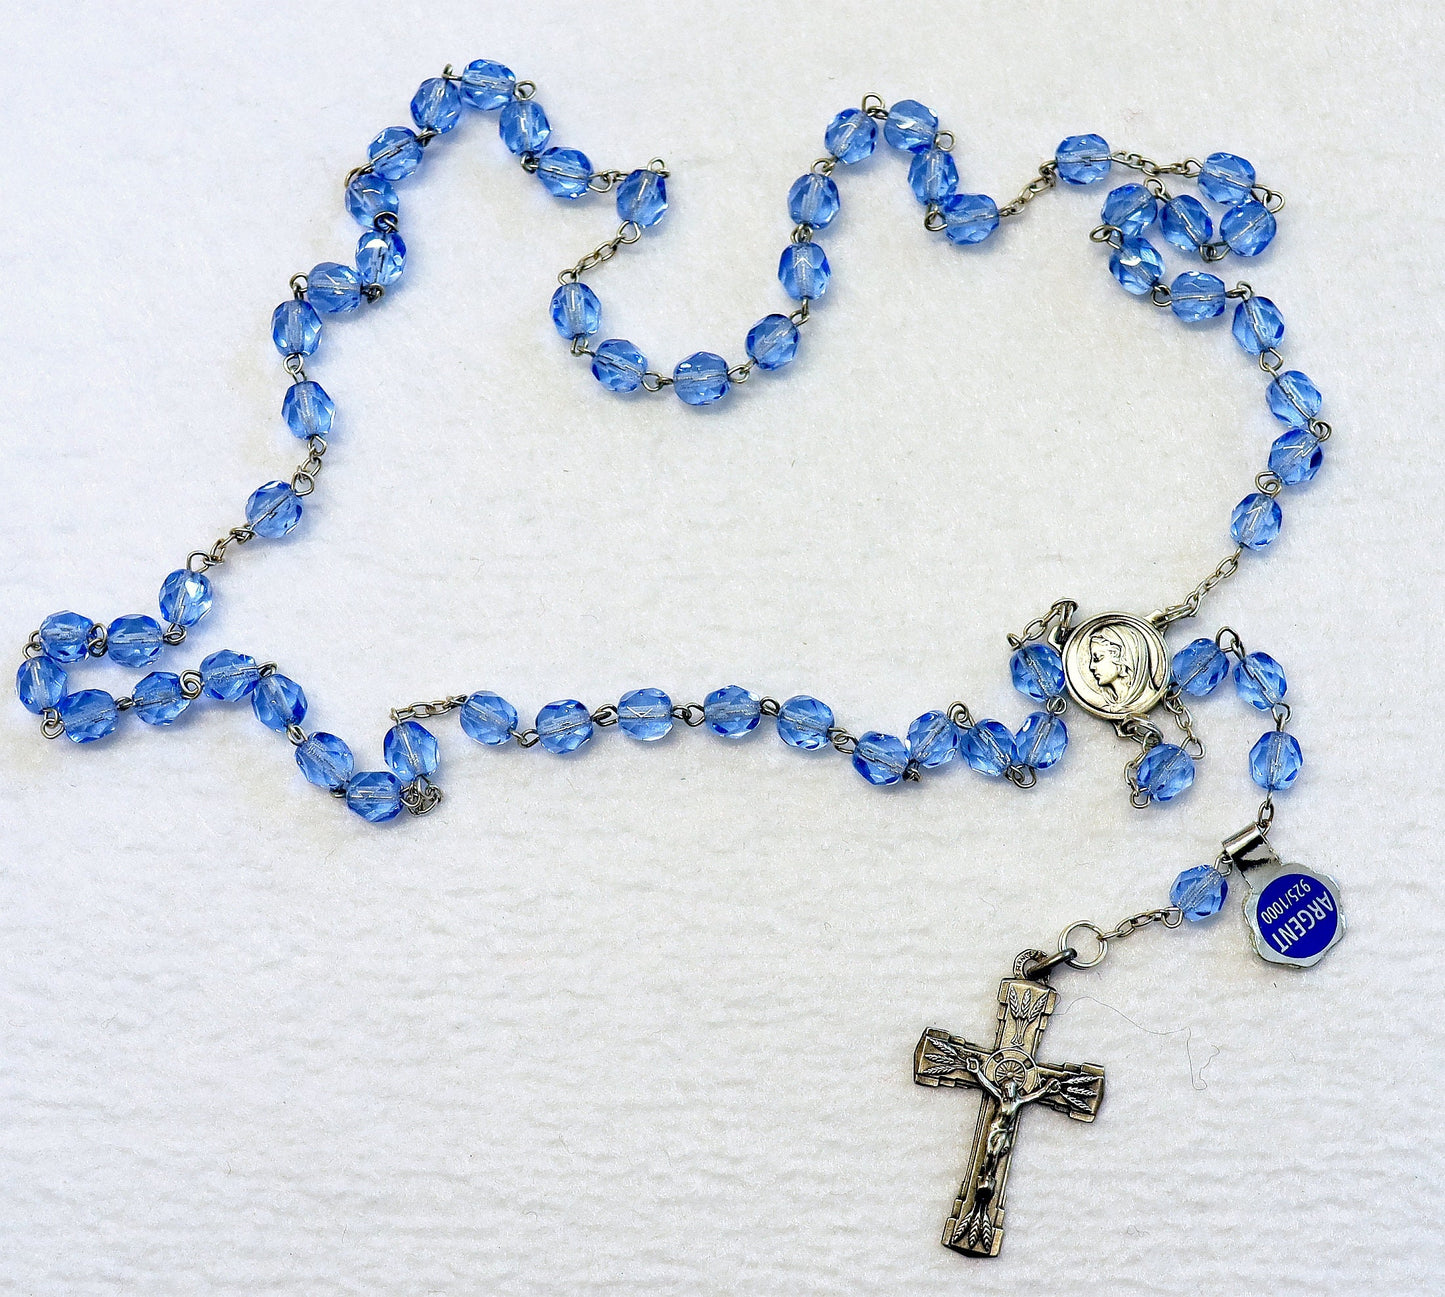 Catholic Vintage Rosary New Old Stock Blue Crystal Sterling Silver Exquisite Series No41